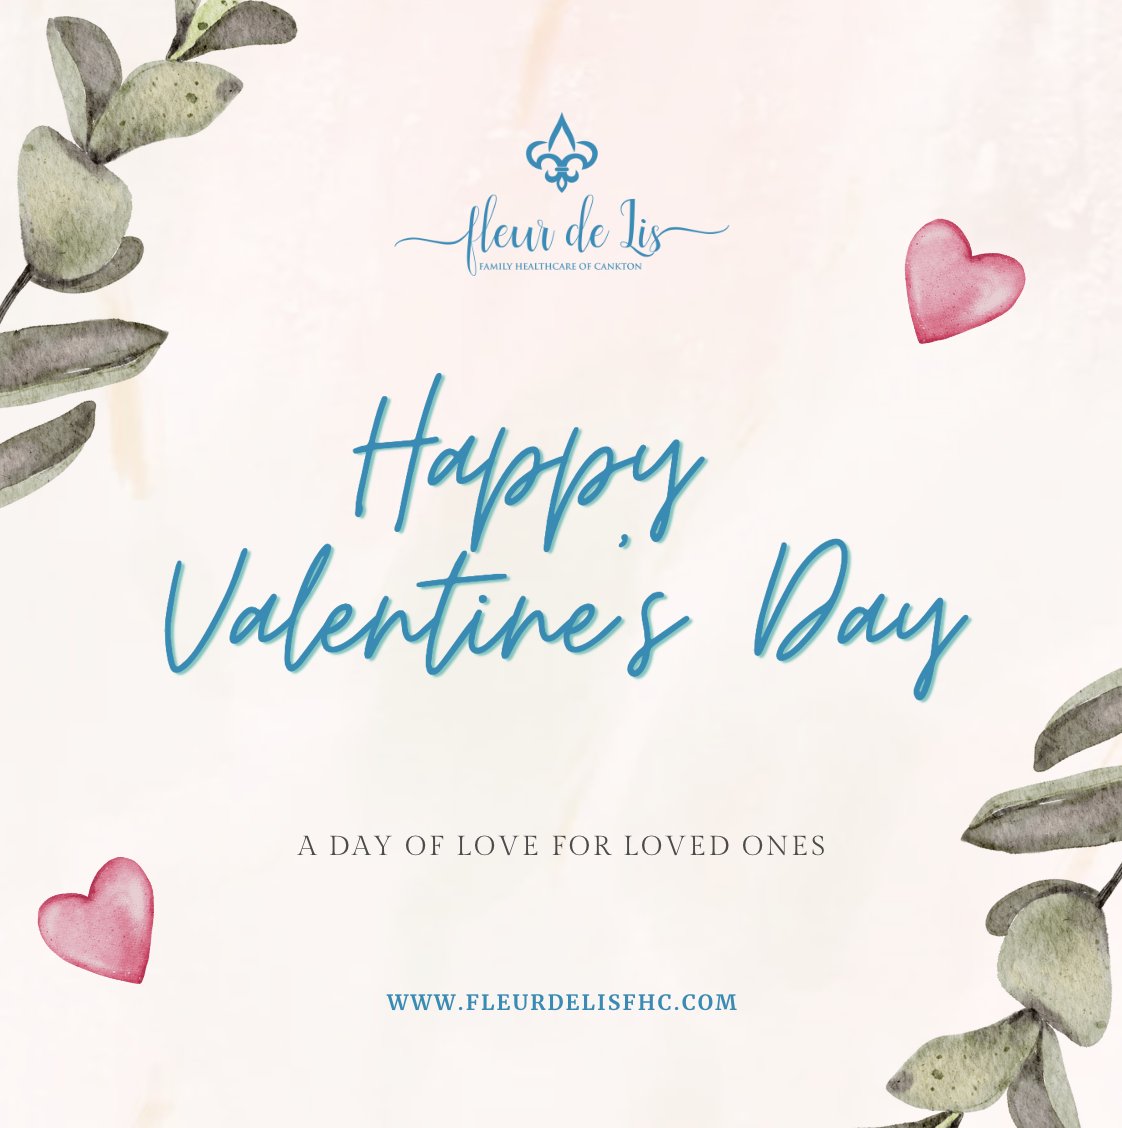 Fleur De Lis Family Healthcare Clinic of Cankton wishes you a Happy Valentine's Day!

#RHC #RuralHealthcare #Healthcare #UrgentCare #FamilyHealthcare #Cankton #Louisiana #MedicalClinic #Family #Health #UrgentCareClinic #NursePractioner #PatientCare #valentinesday